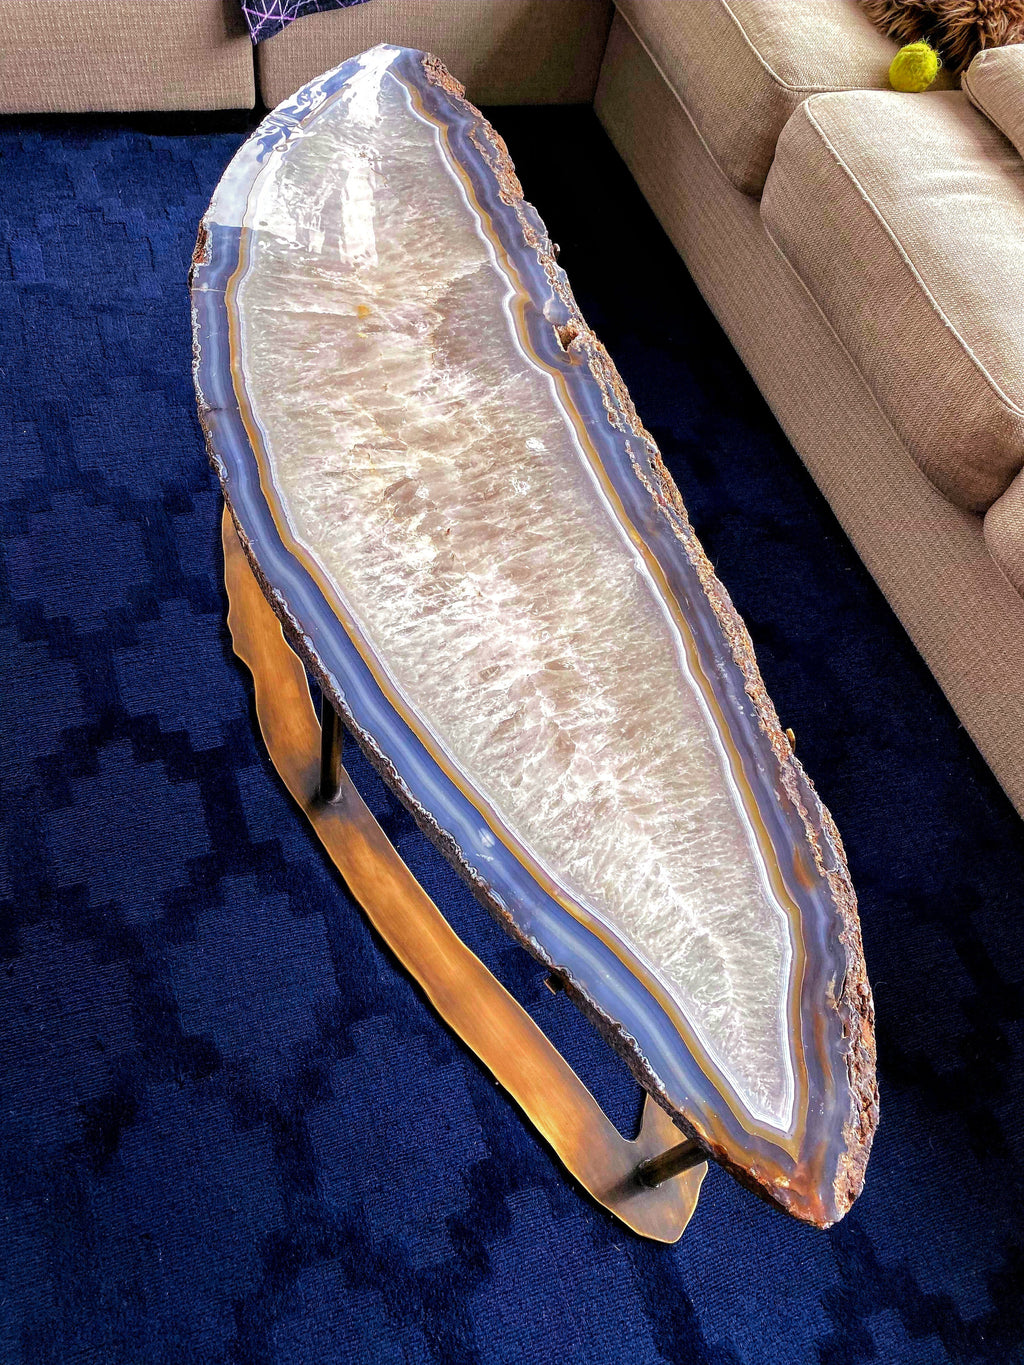 Giant Blue Agate Coffee Table #315  completed with backlights {65" x 20" x 18" tall} (SOLD)